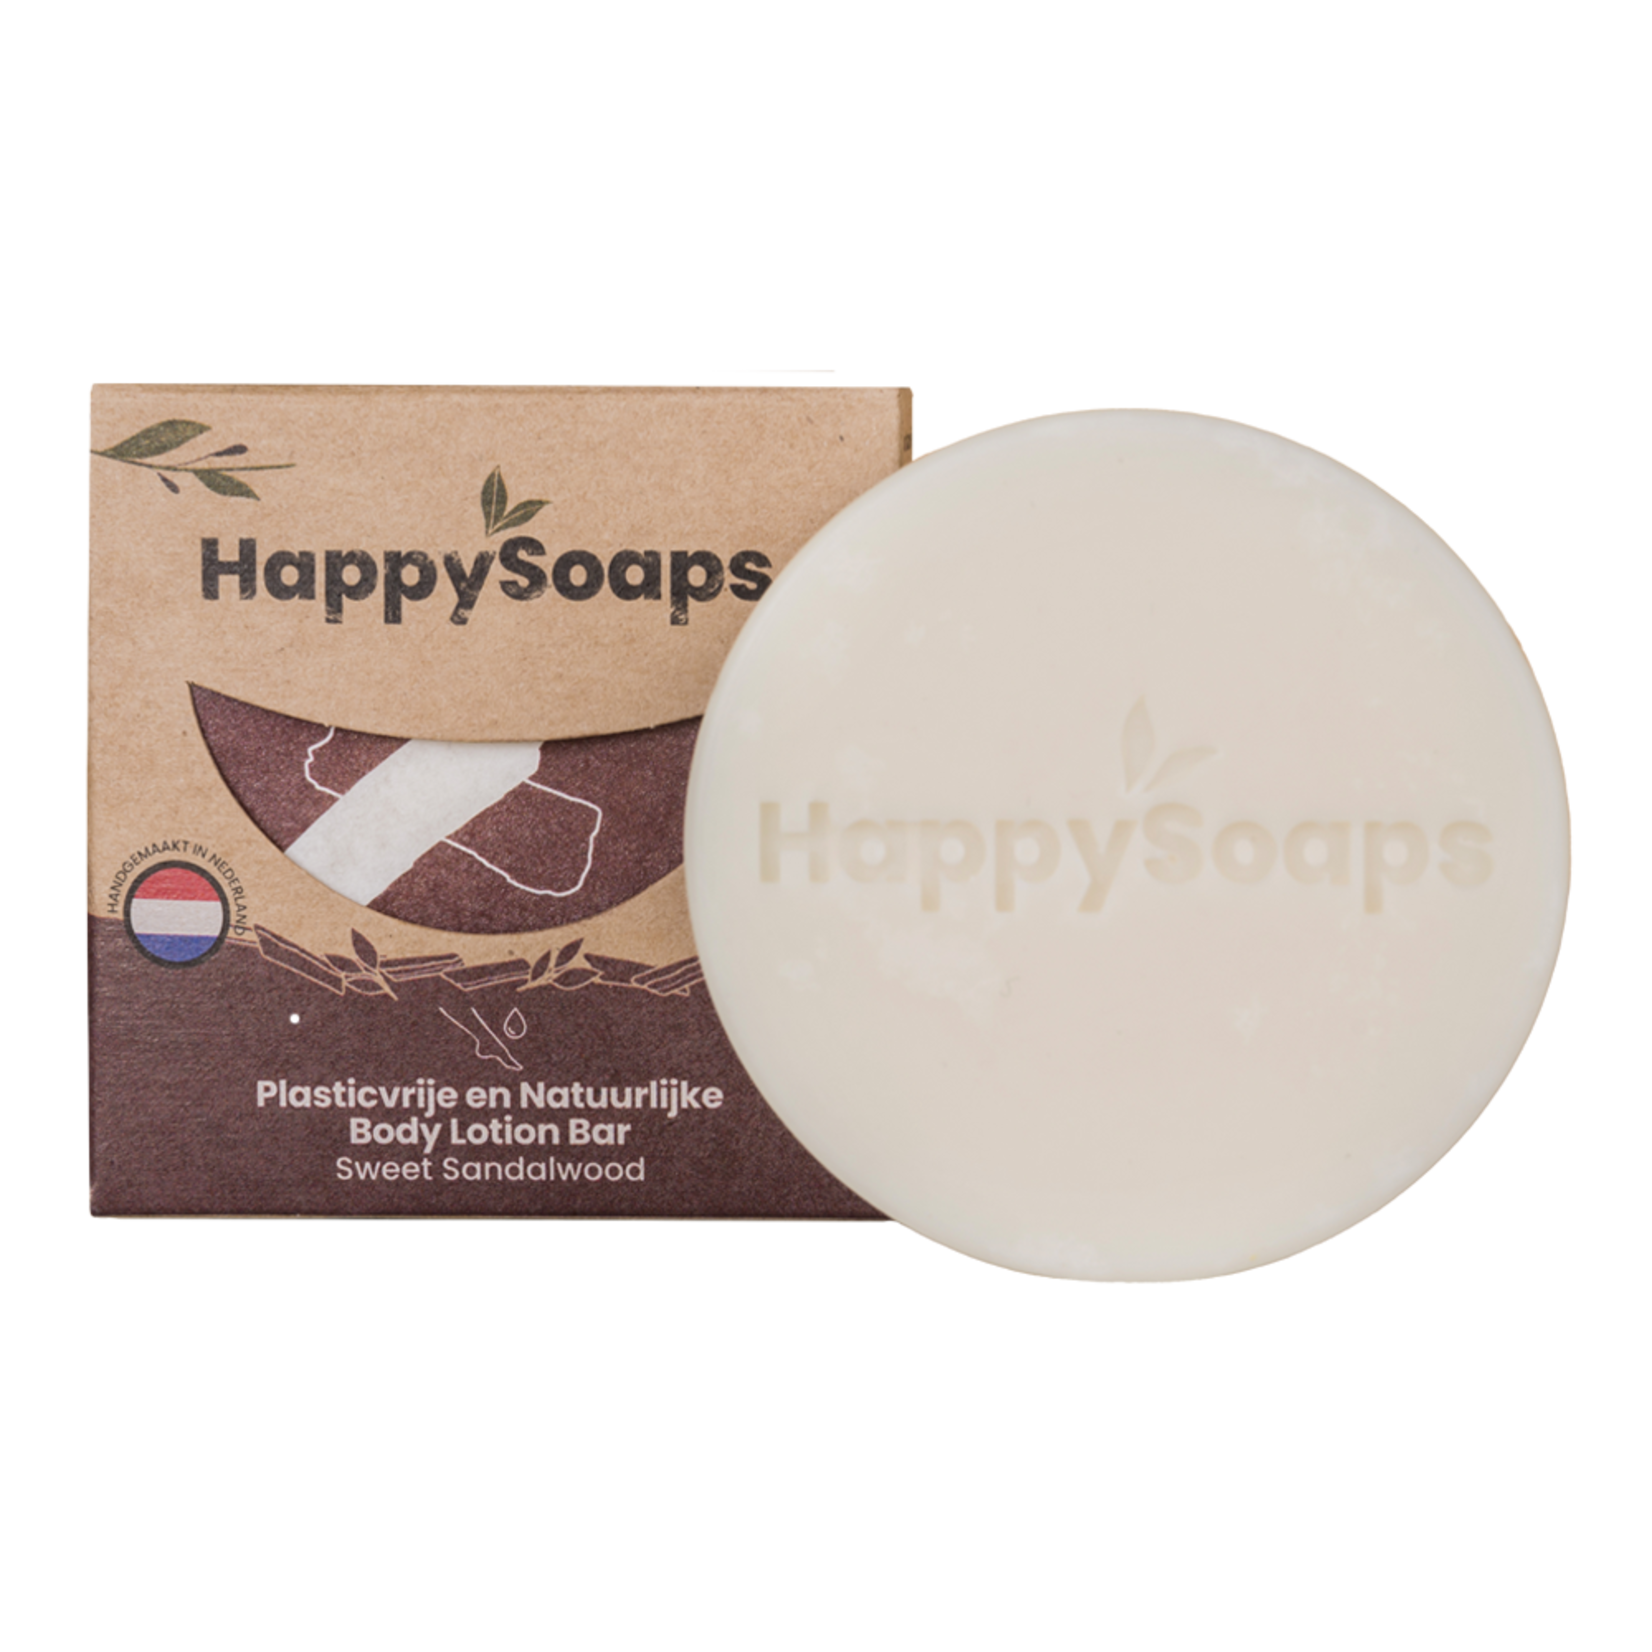 The Happy Soaps Happy Soaps Lotion bar